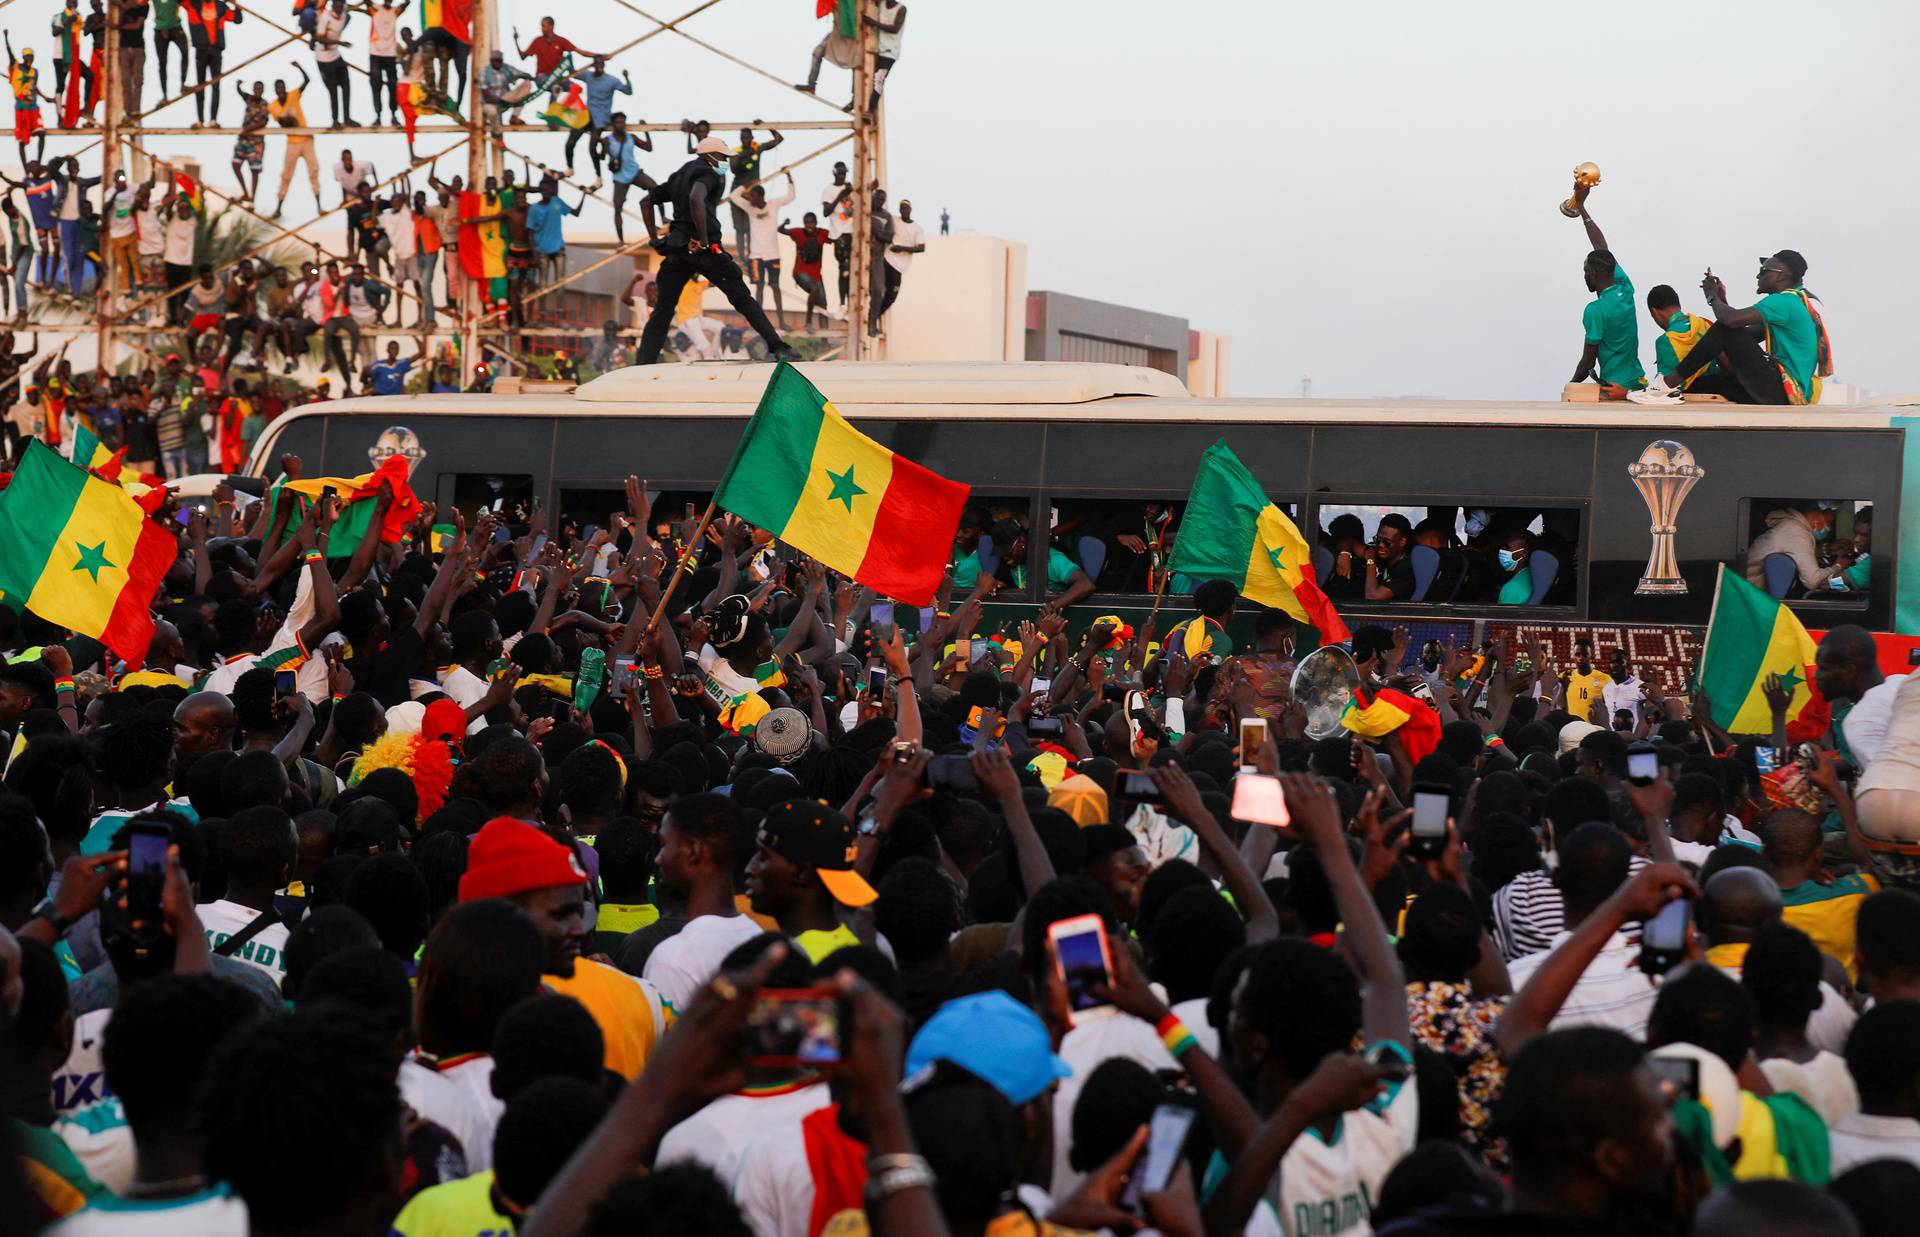 Senegal fans celebrate and welcome the Senegal National Soccer Team after their Africa Cup win, in Dakar